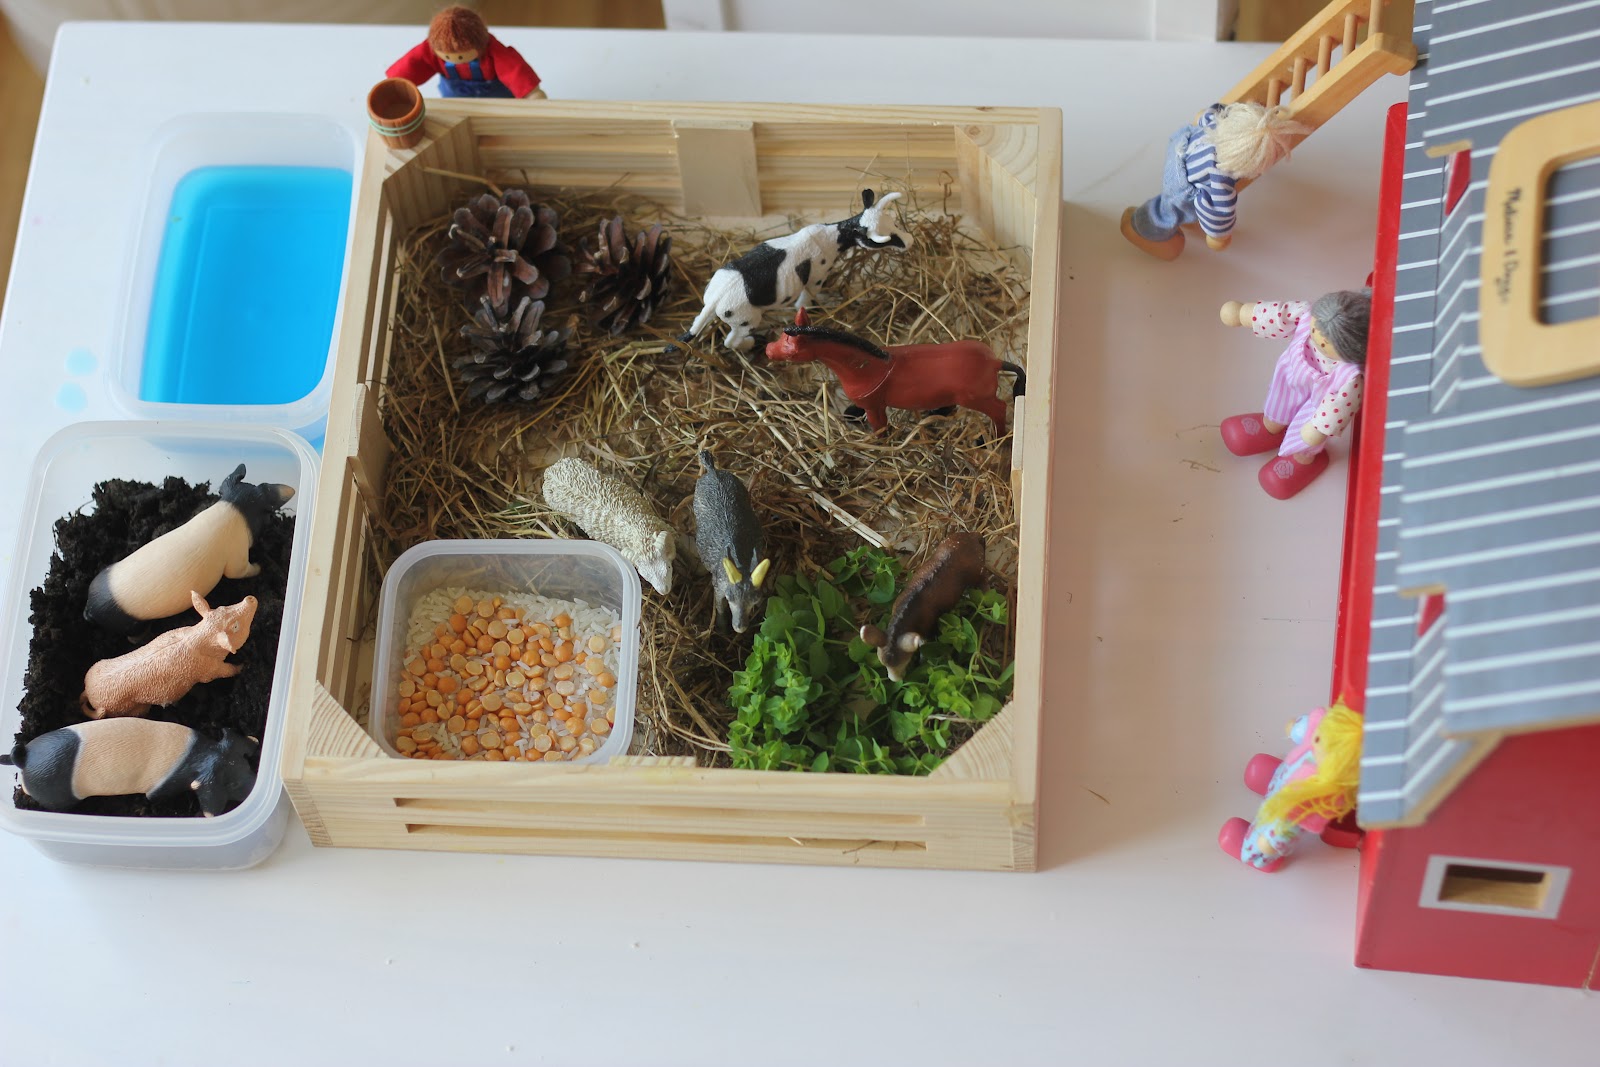 How to Set Up a Sensory Farm Yard Small World - My Bored Toddler